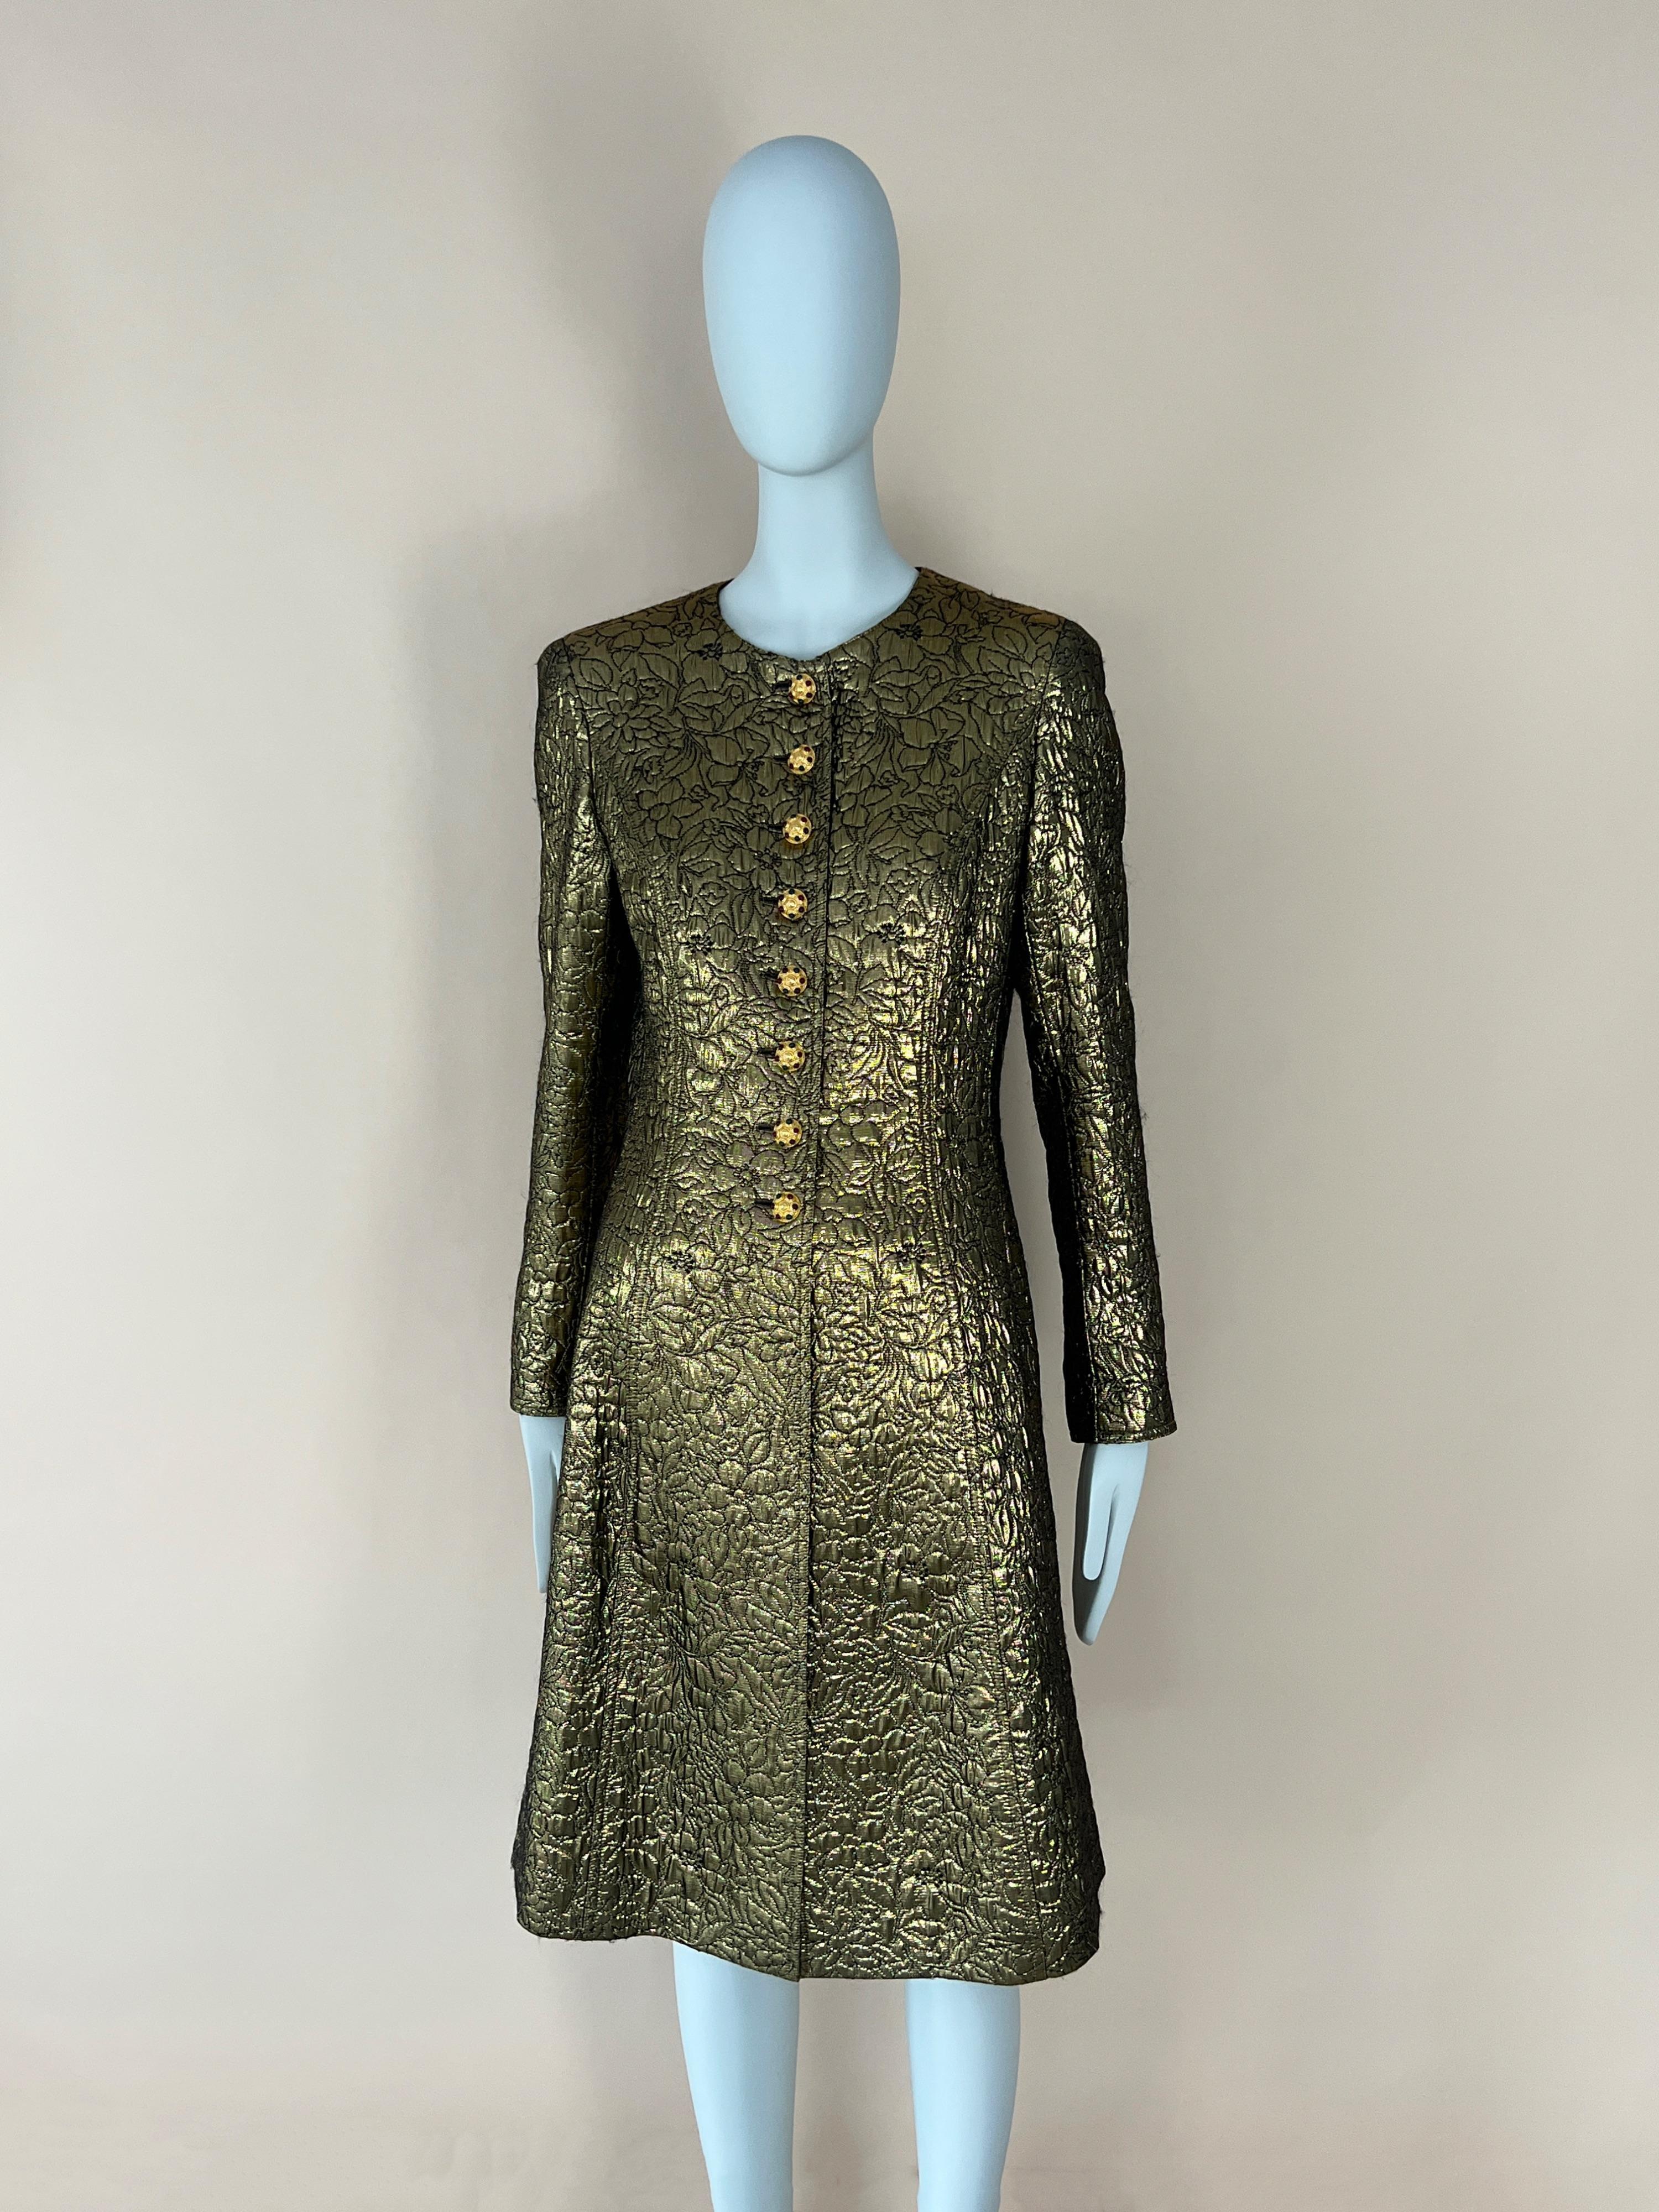 Chanel Lady Gaga Style Collectors Brocade Coat For Sale 9